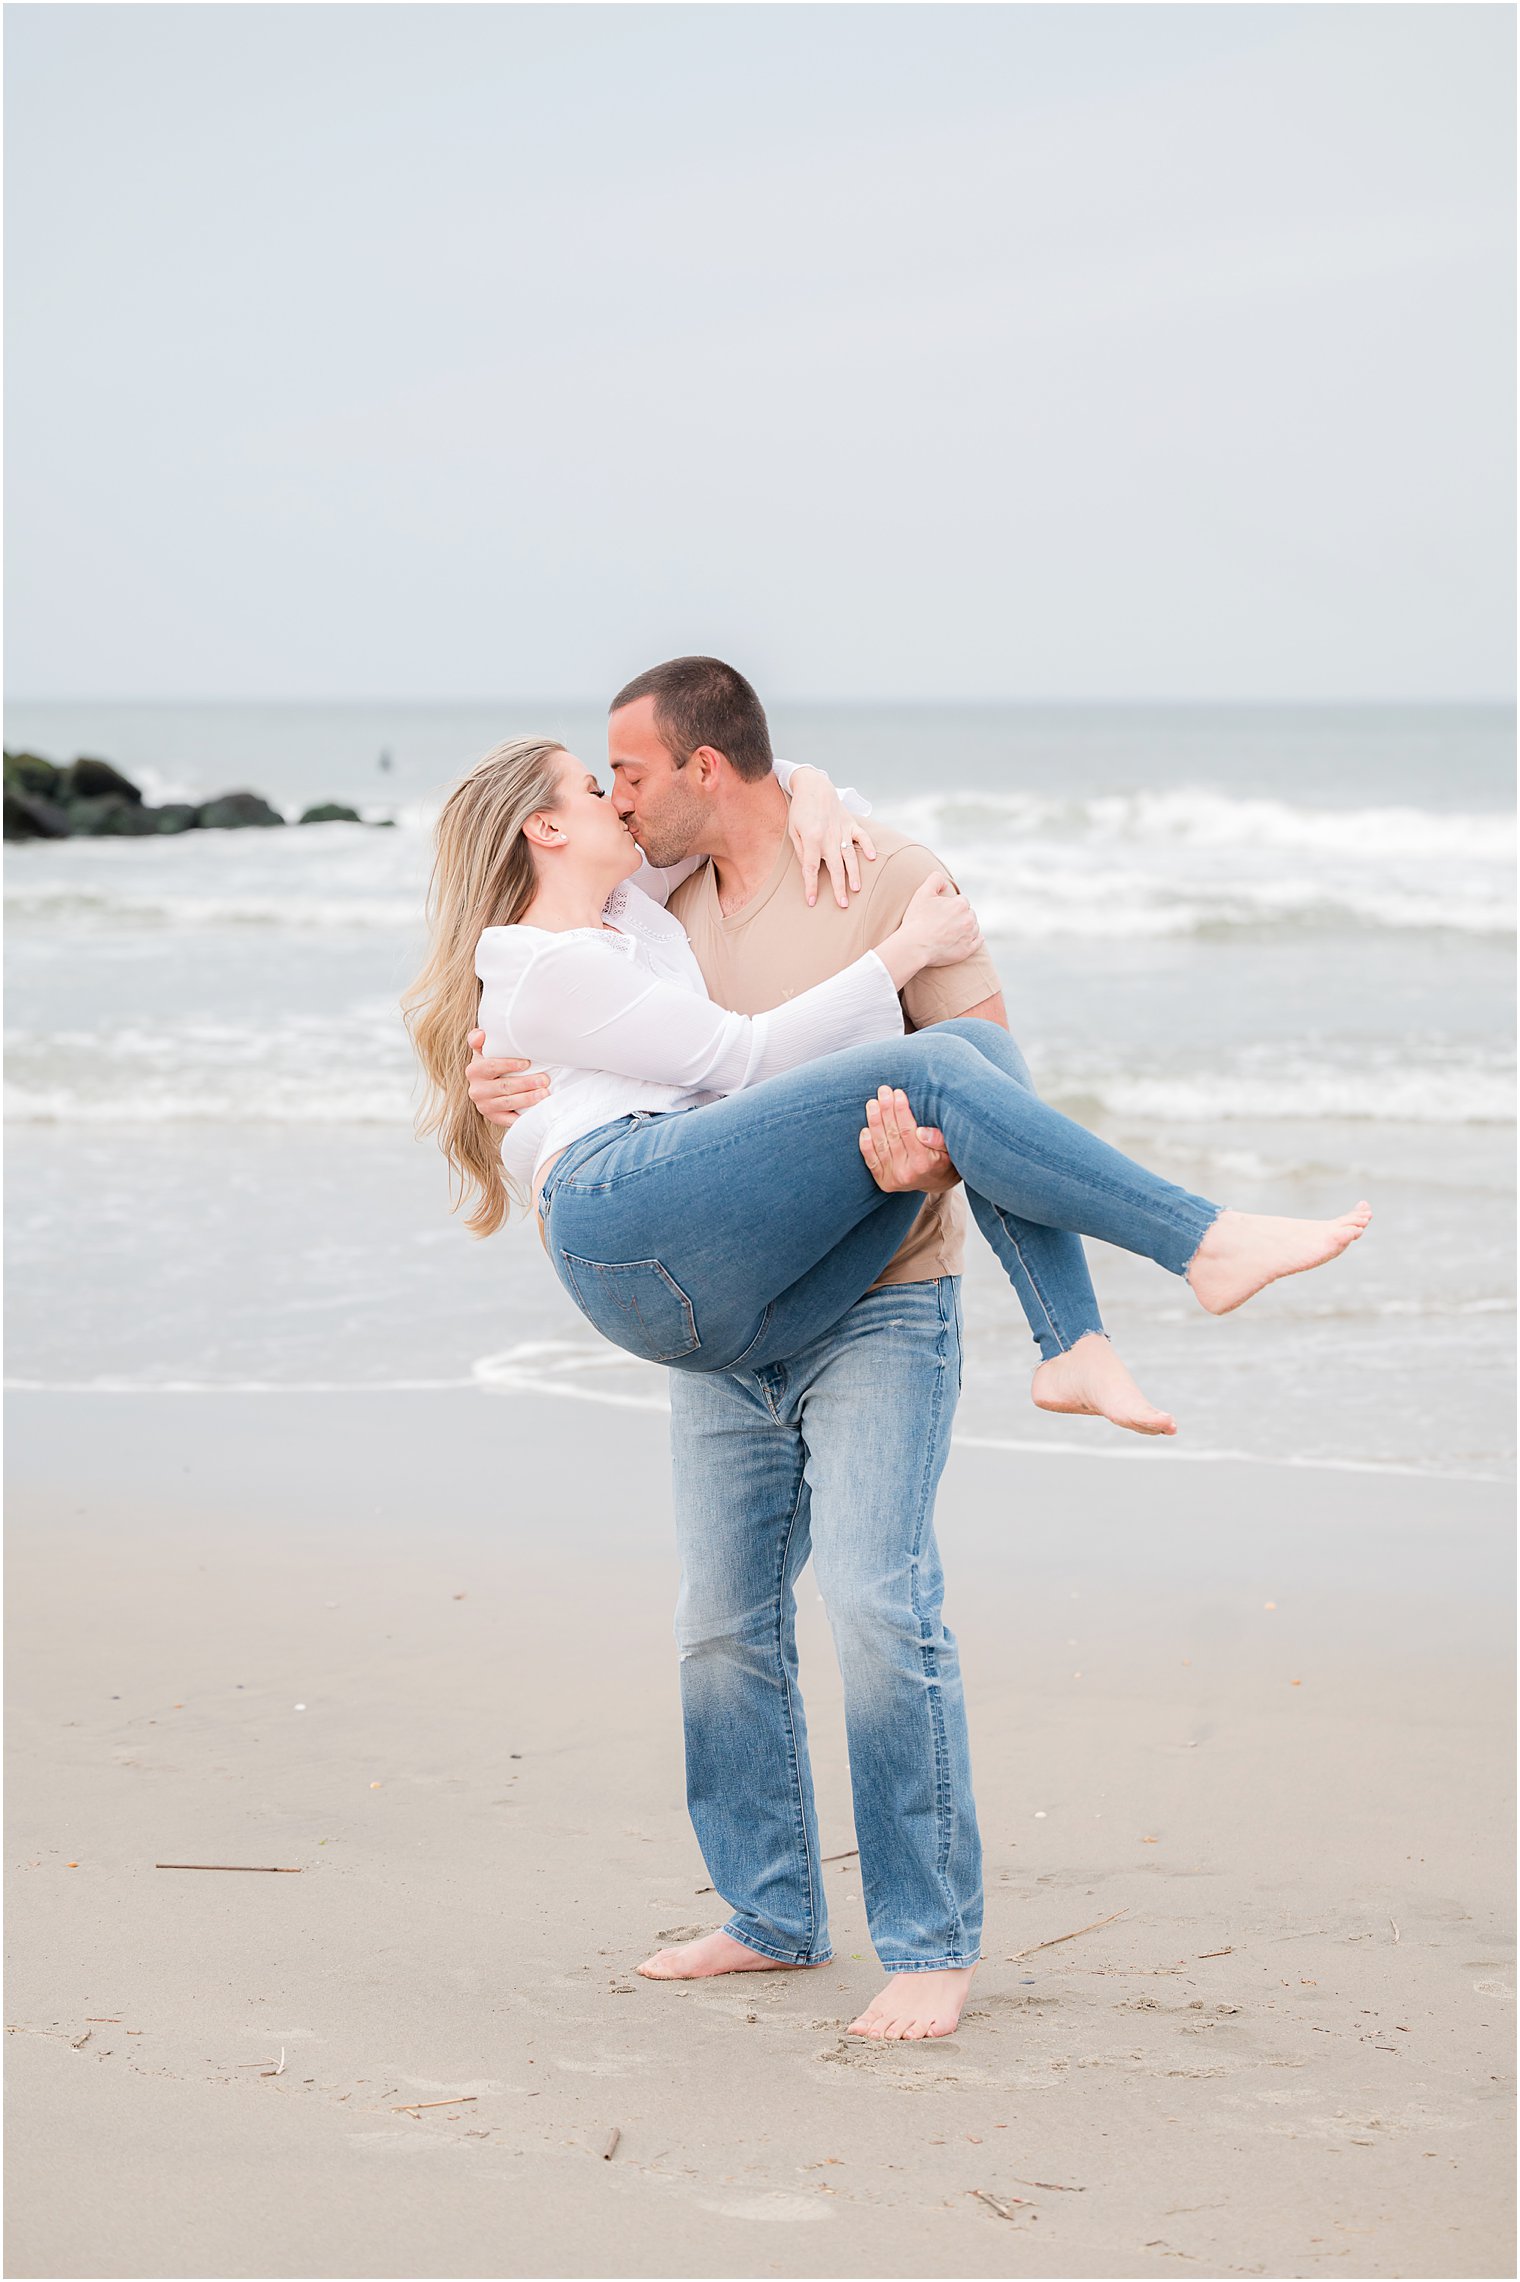 man lifts up woman on beach kissing her during Spring Lake engagement session